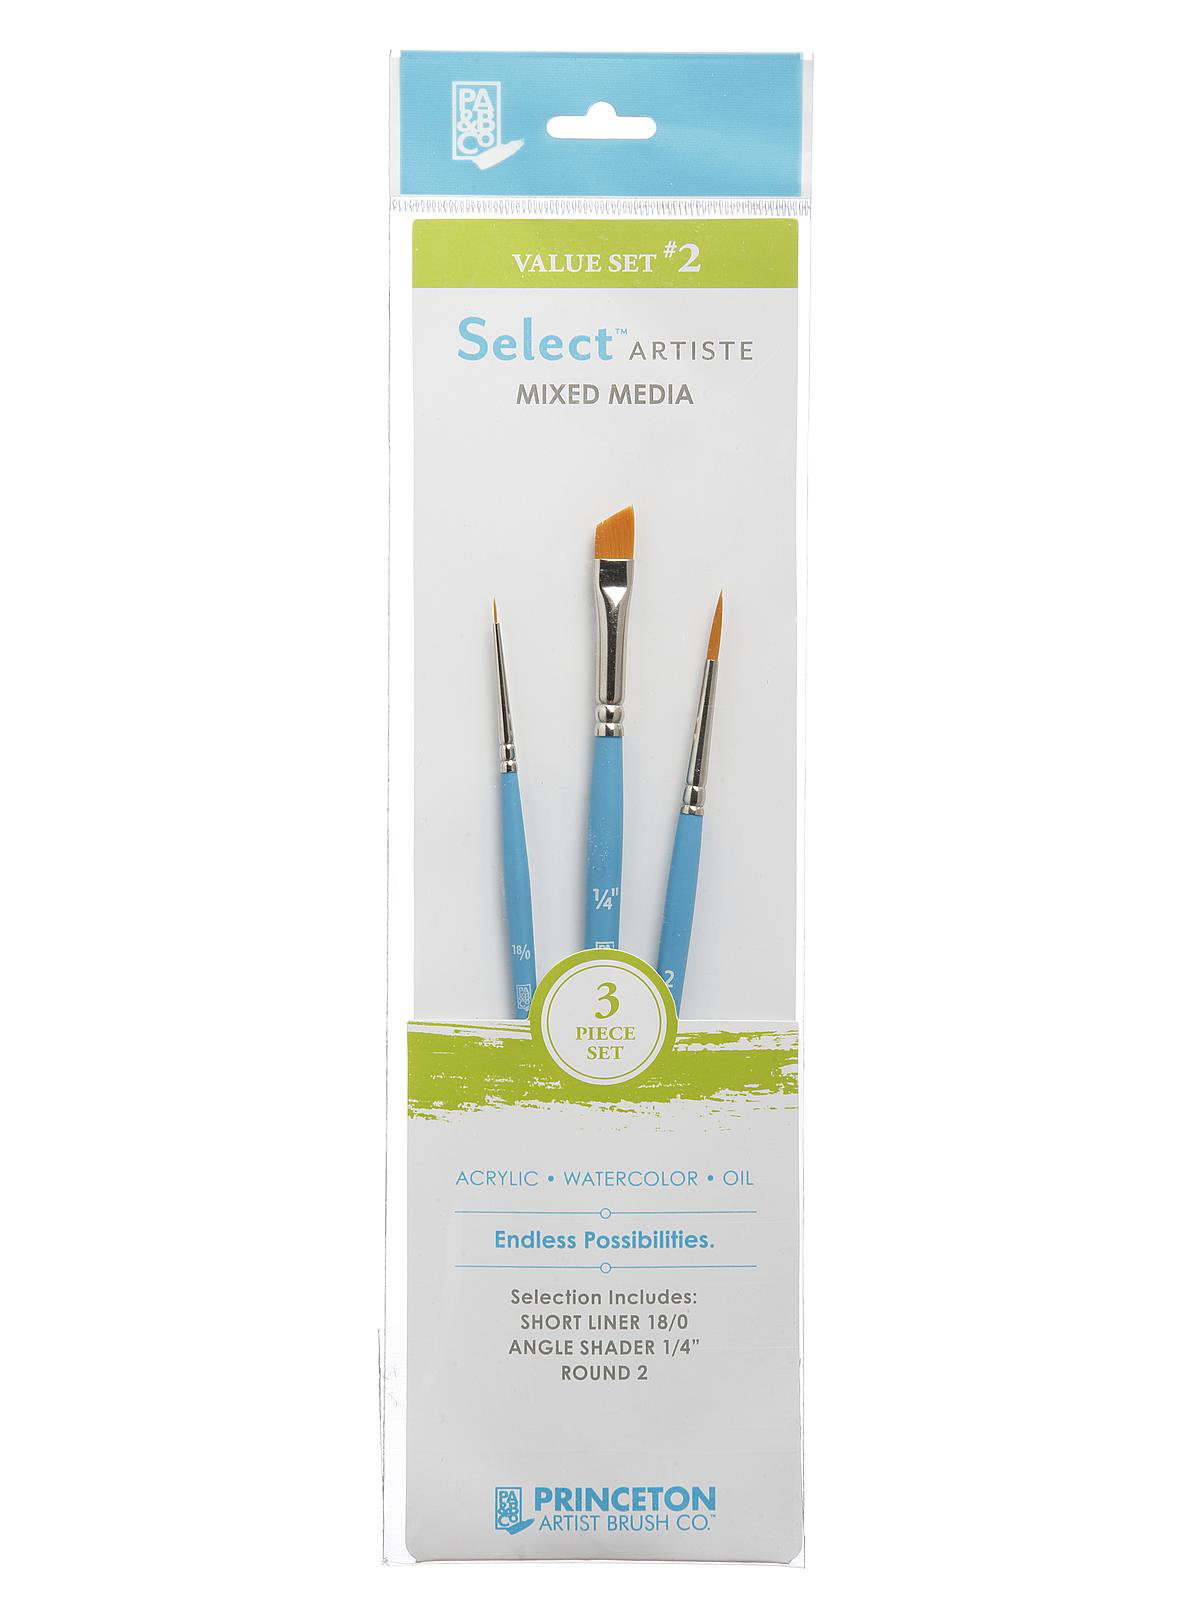  PRINCETON ARTIST BRUSH CO. SelectArtiste Fine Art  Multi-Technique Brush Set, 3 x Synthetic Brushes, Ideal for Professionals &  Students